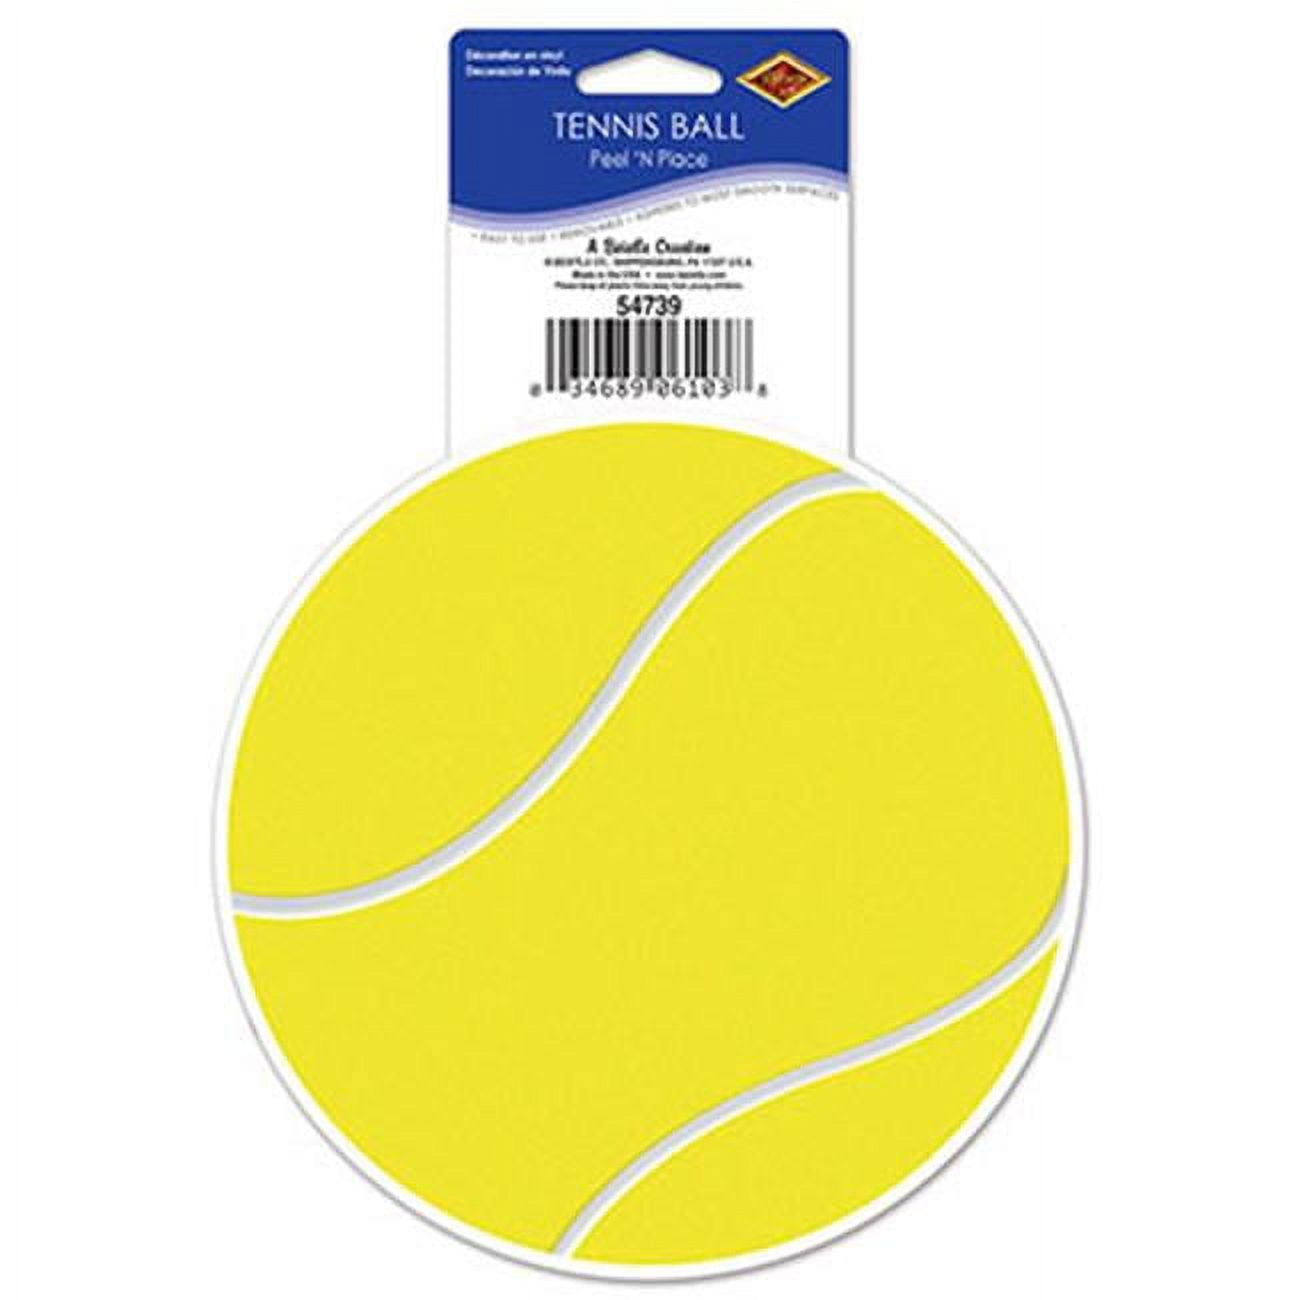 Picture of Beistle 54739 5.25 in. Tennis Ball Peel N Place - Yellow & White